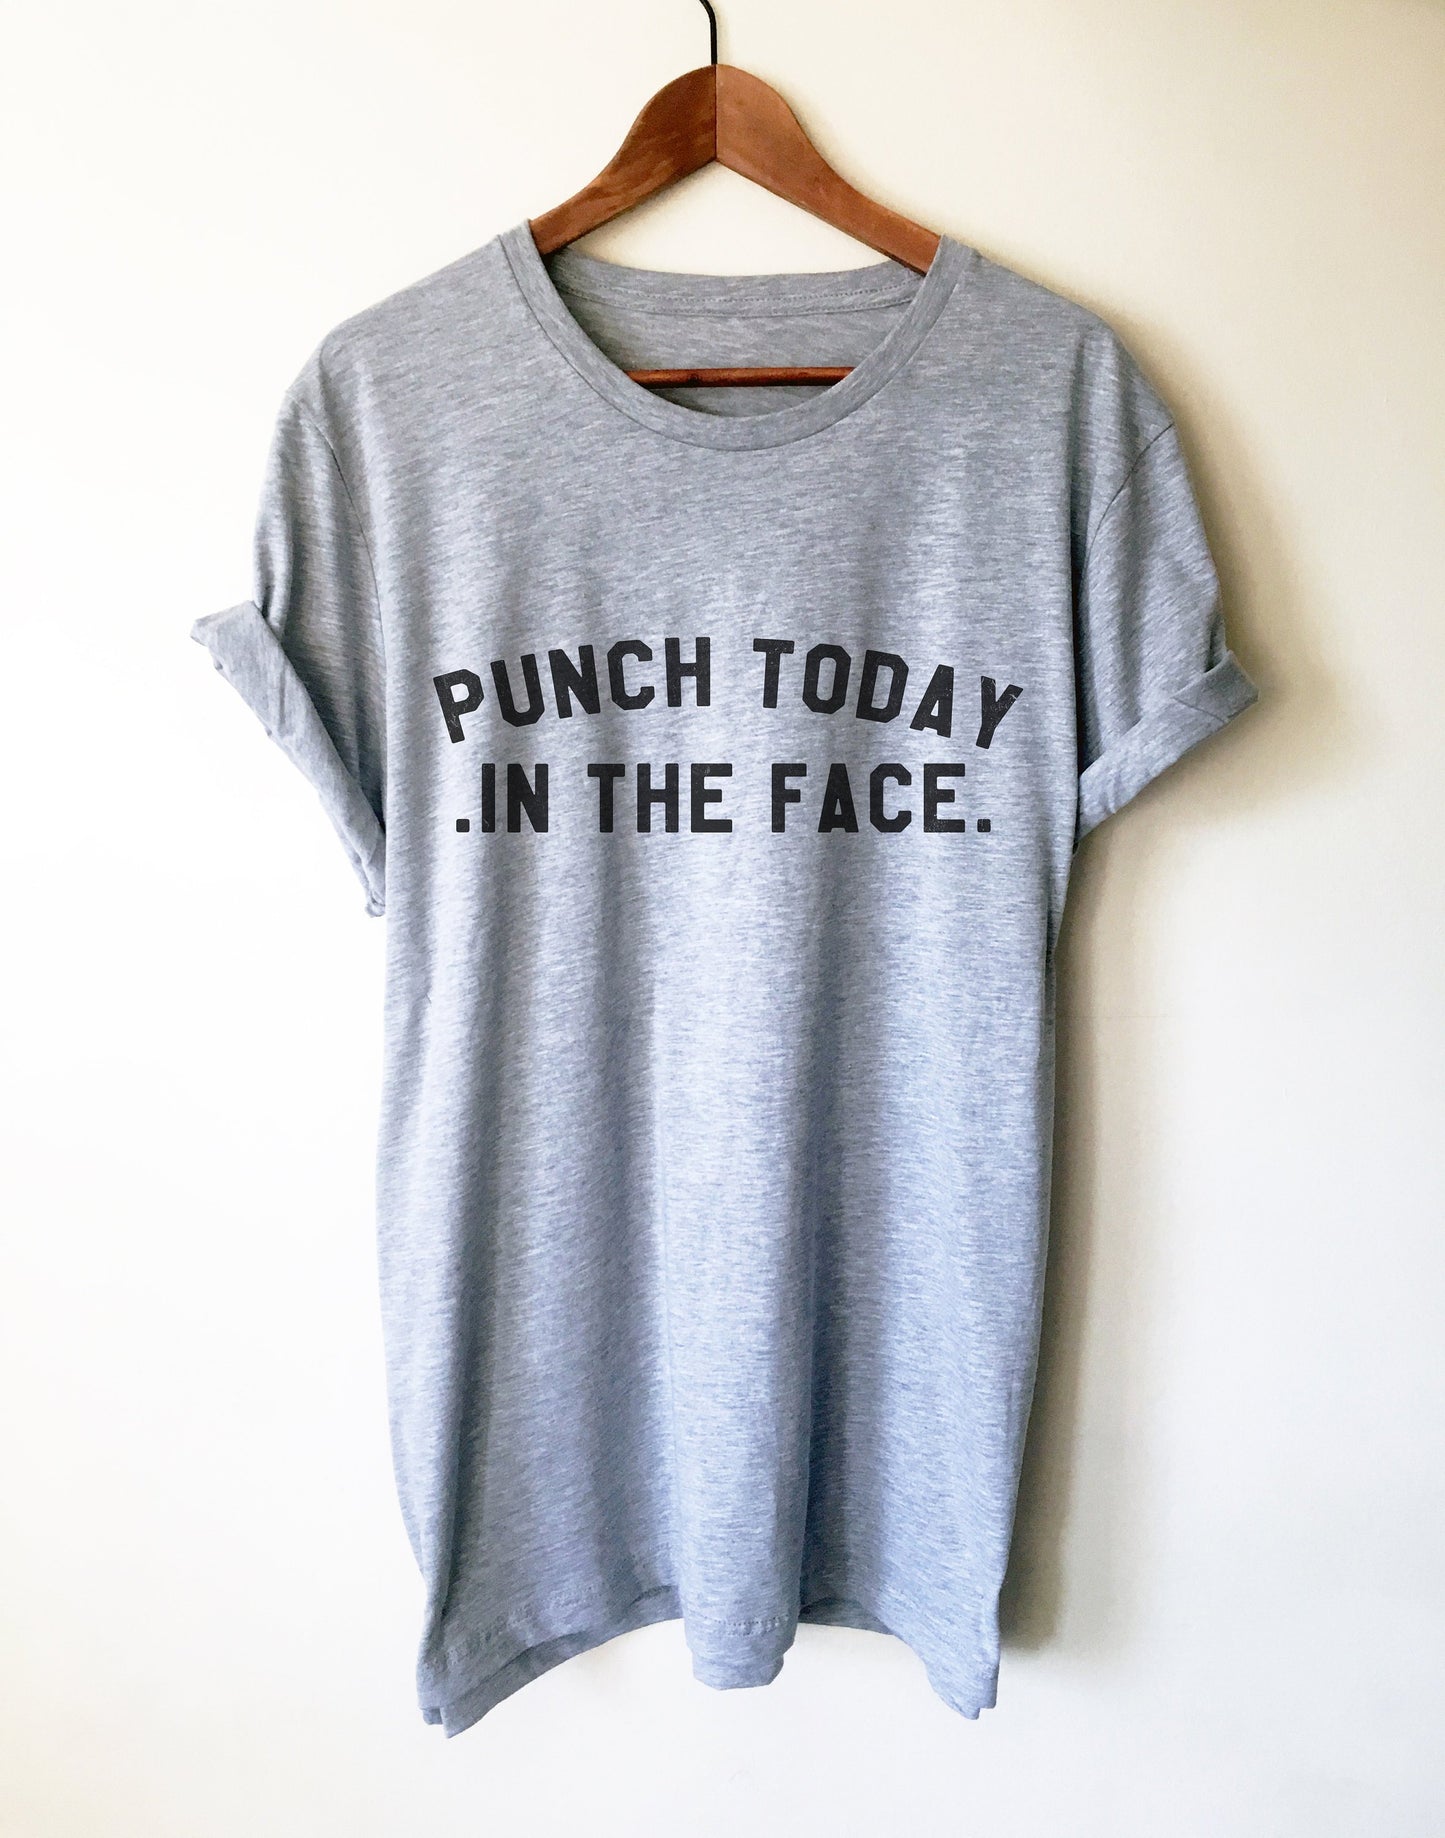 Punch Today In The Face Unisex Shirt - Tumblr Shirt, Instagram Shirt, Punch Today, Sassy Shirt, Sassy Gift, Mean Shirt,